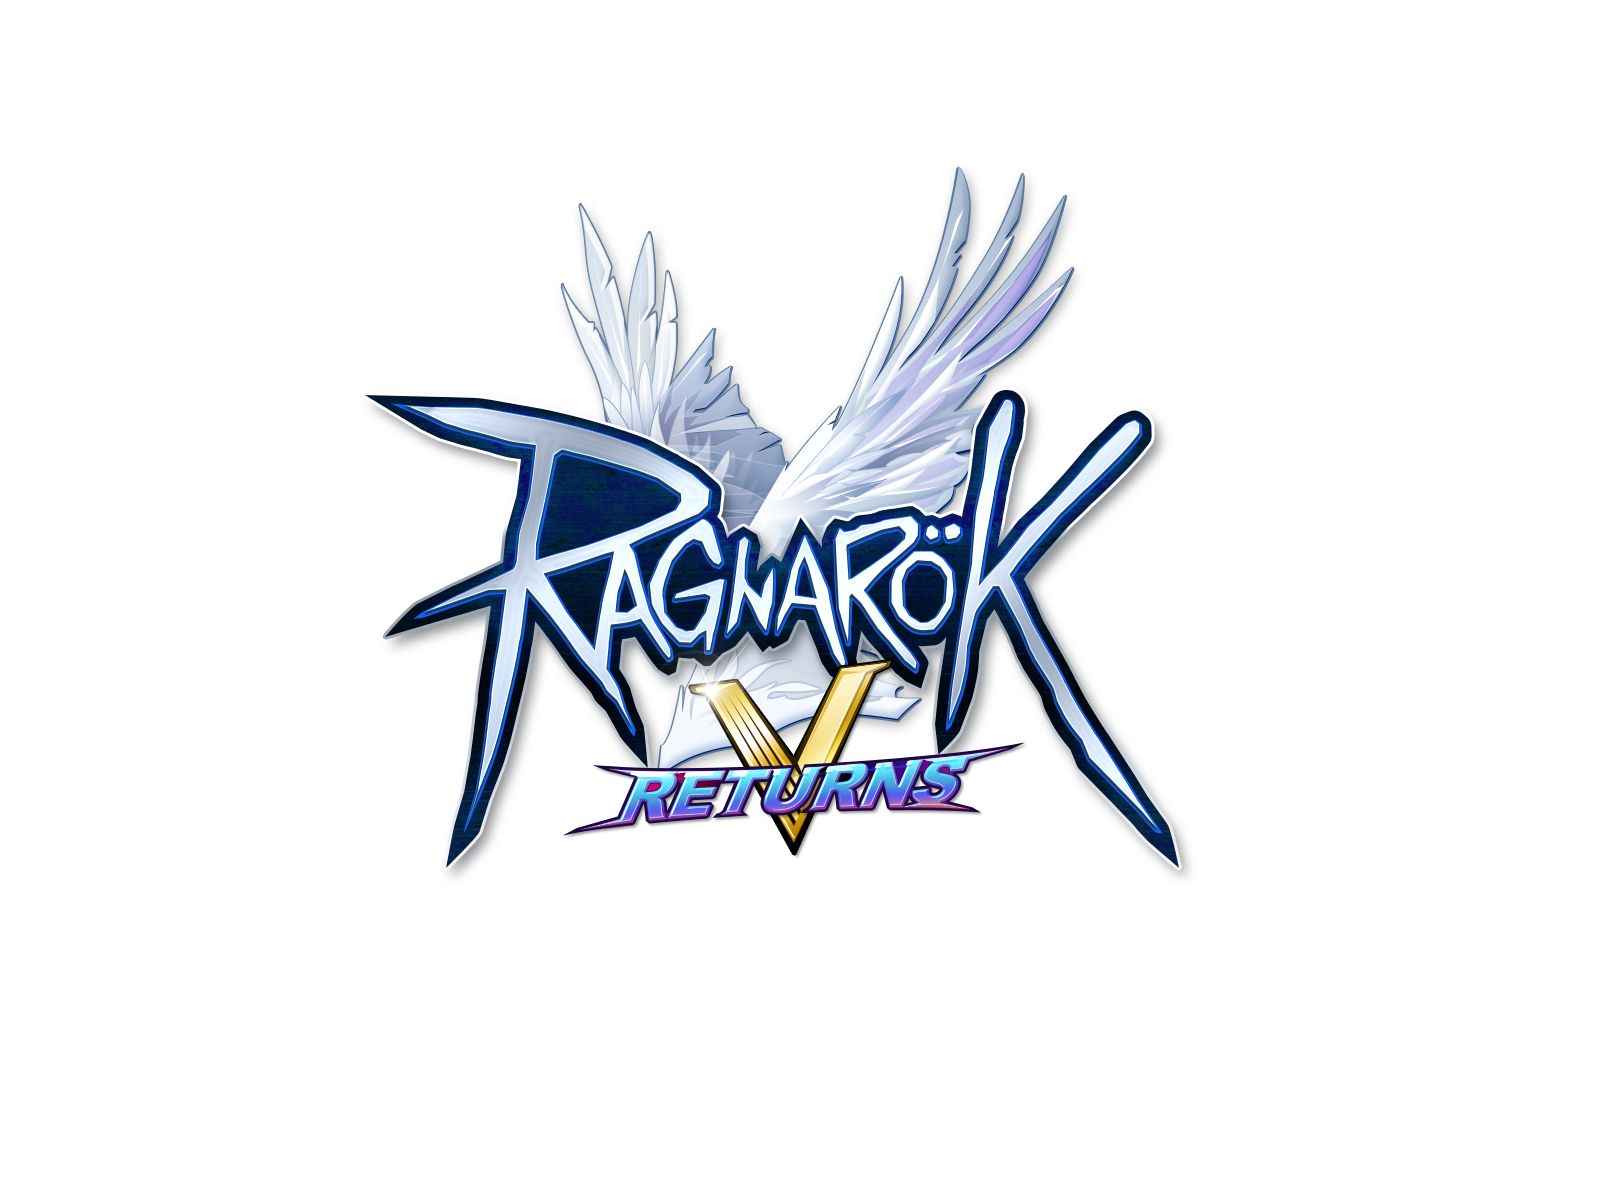 Ragnarok Online - Gravity preparing to flood the world with 3 more Ragnarok  games in 2021 - MMO Culture